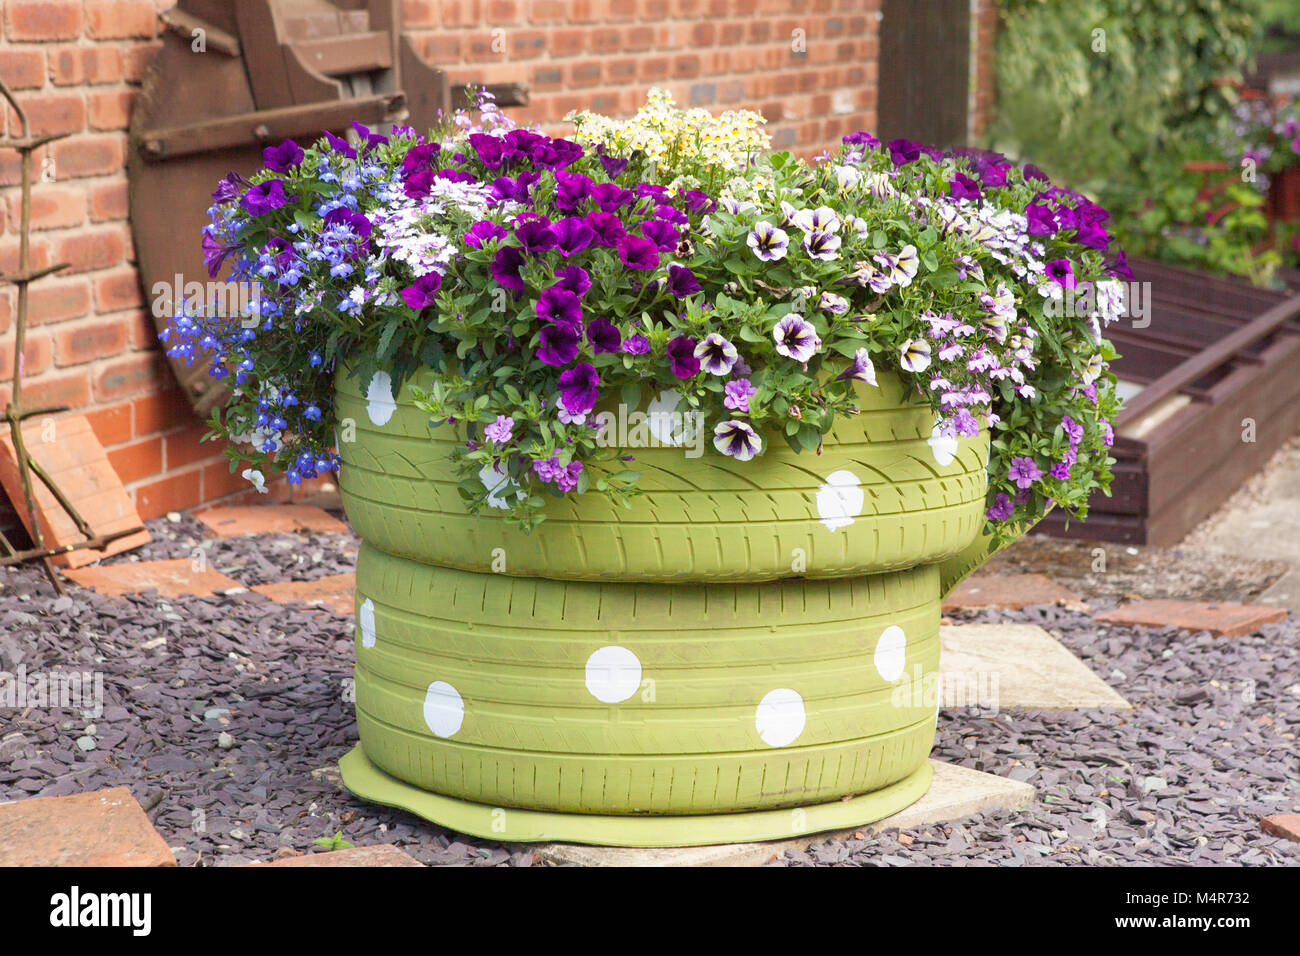 An outsized tea cup made from car tyres planted with petunias and lobelia Stock Photo